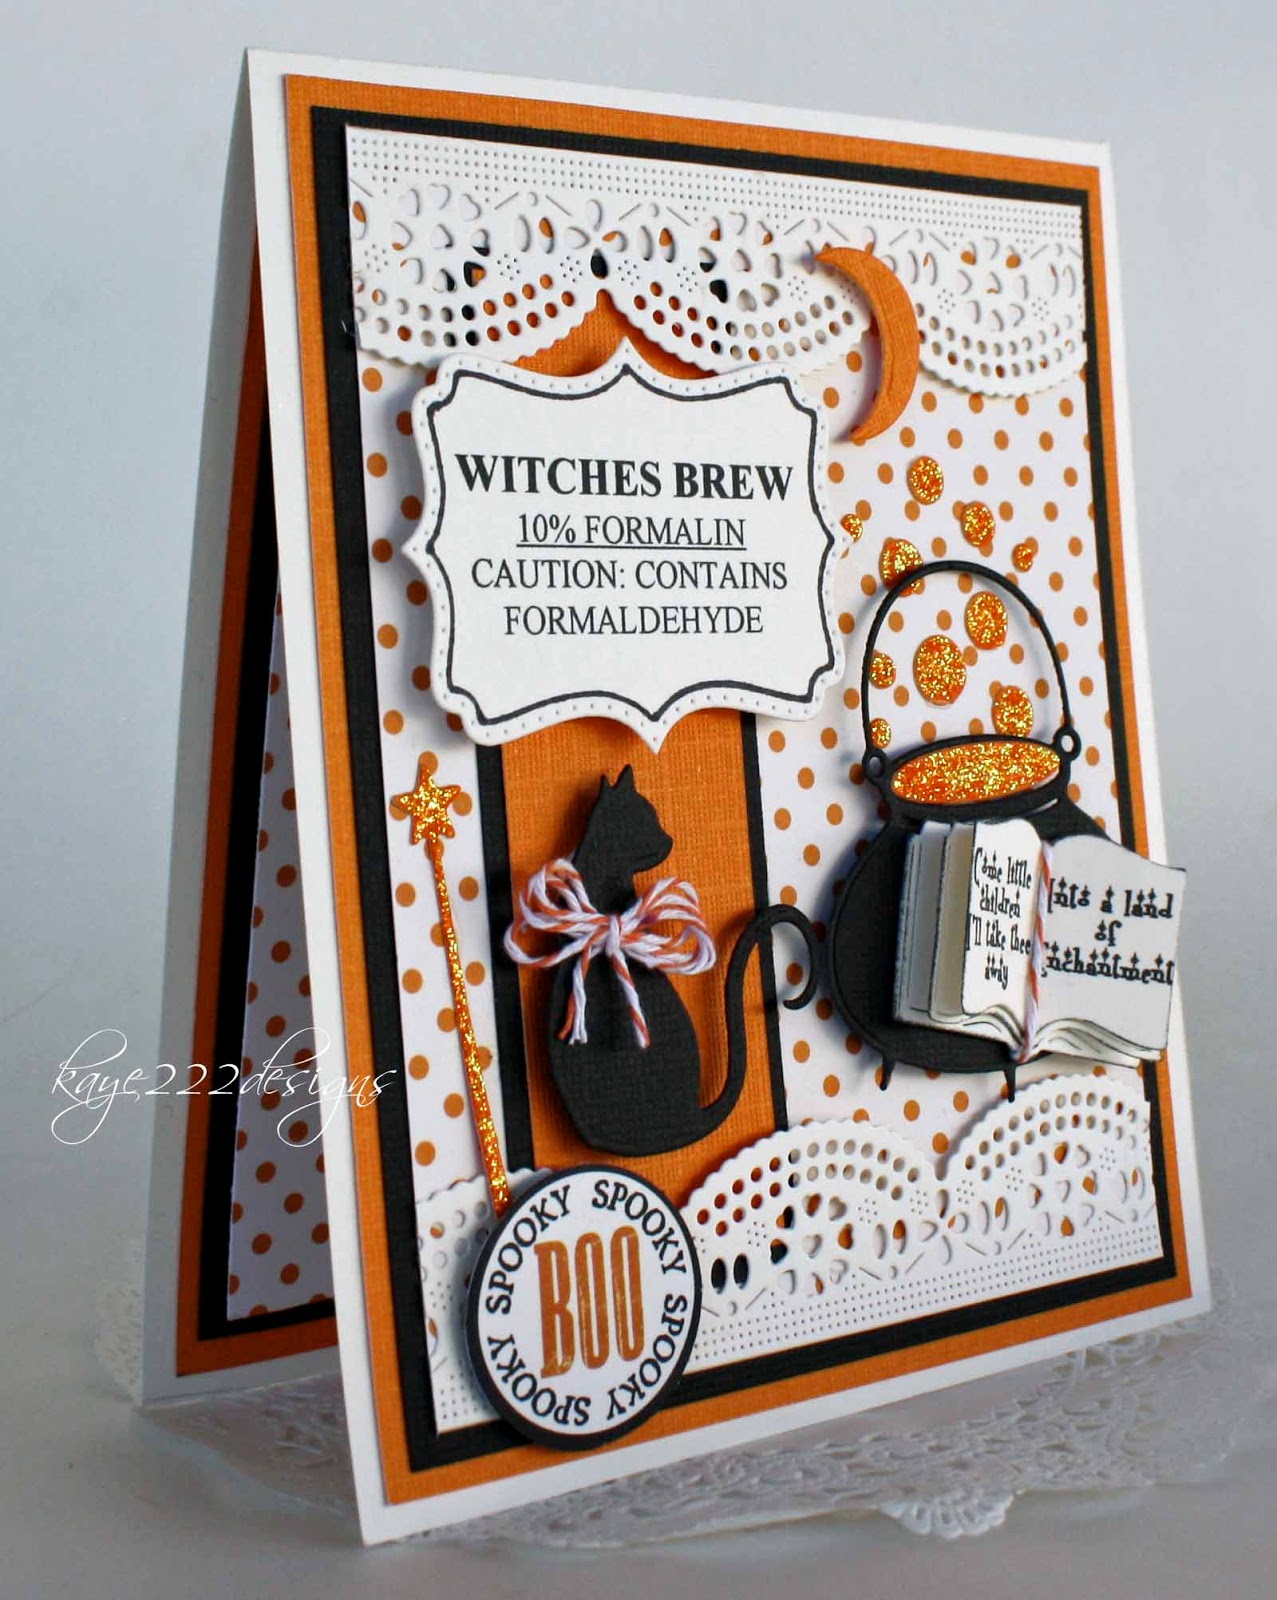 Witches Brew With Lisa Blastick - Cheery Lynn Designs Inspiration Blog